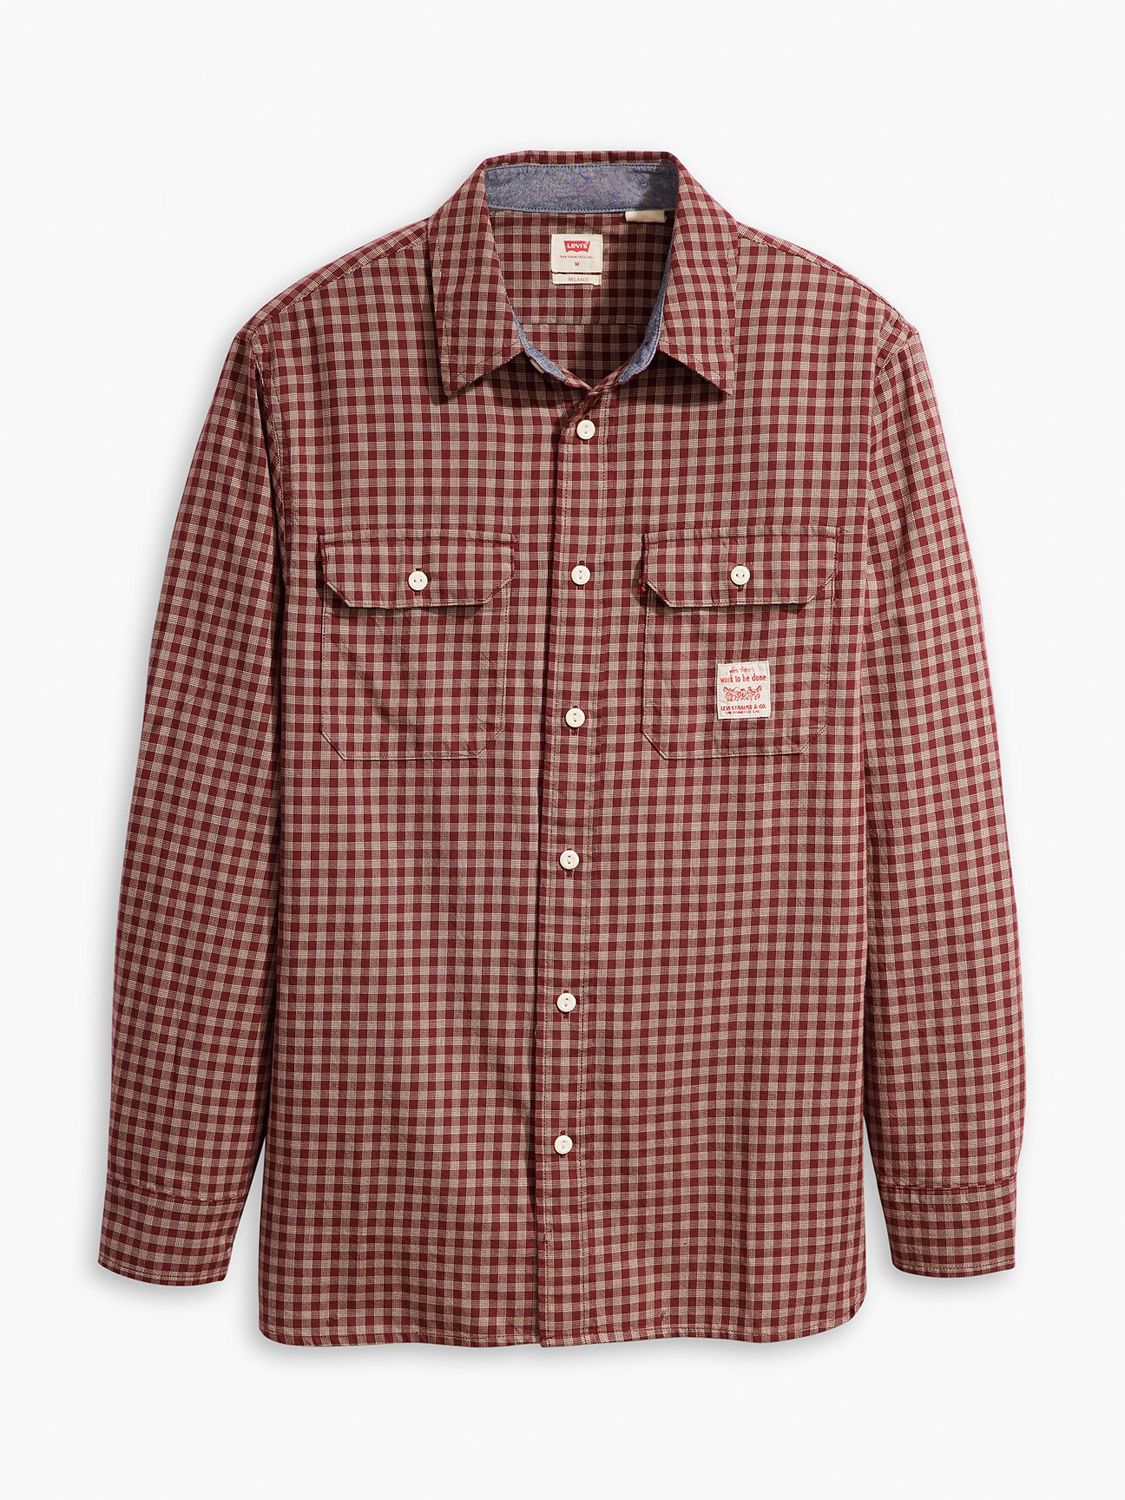 Levi's Classic Checked Worker Shirt, Red/Multi, M